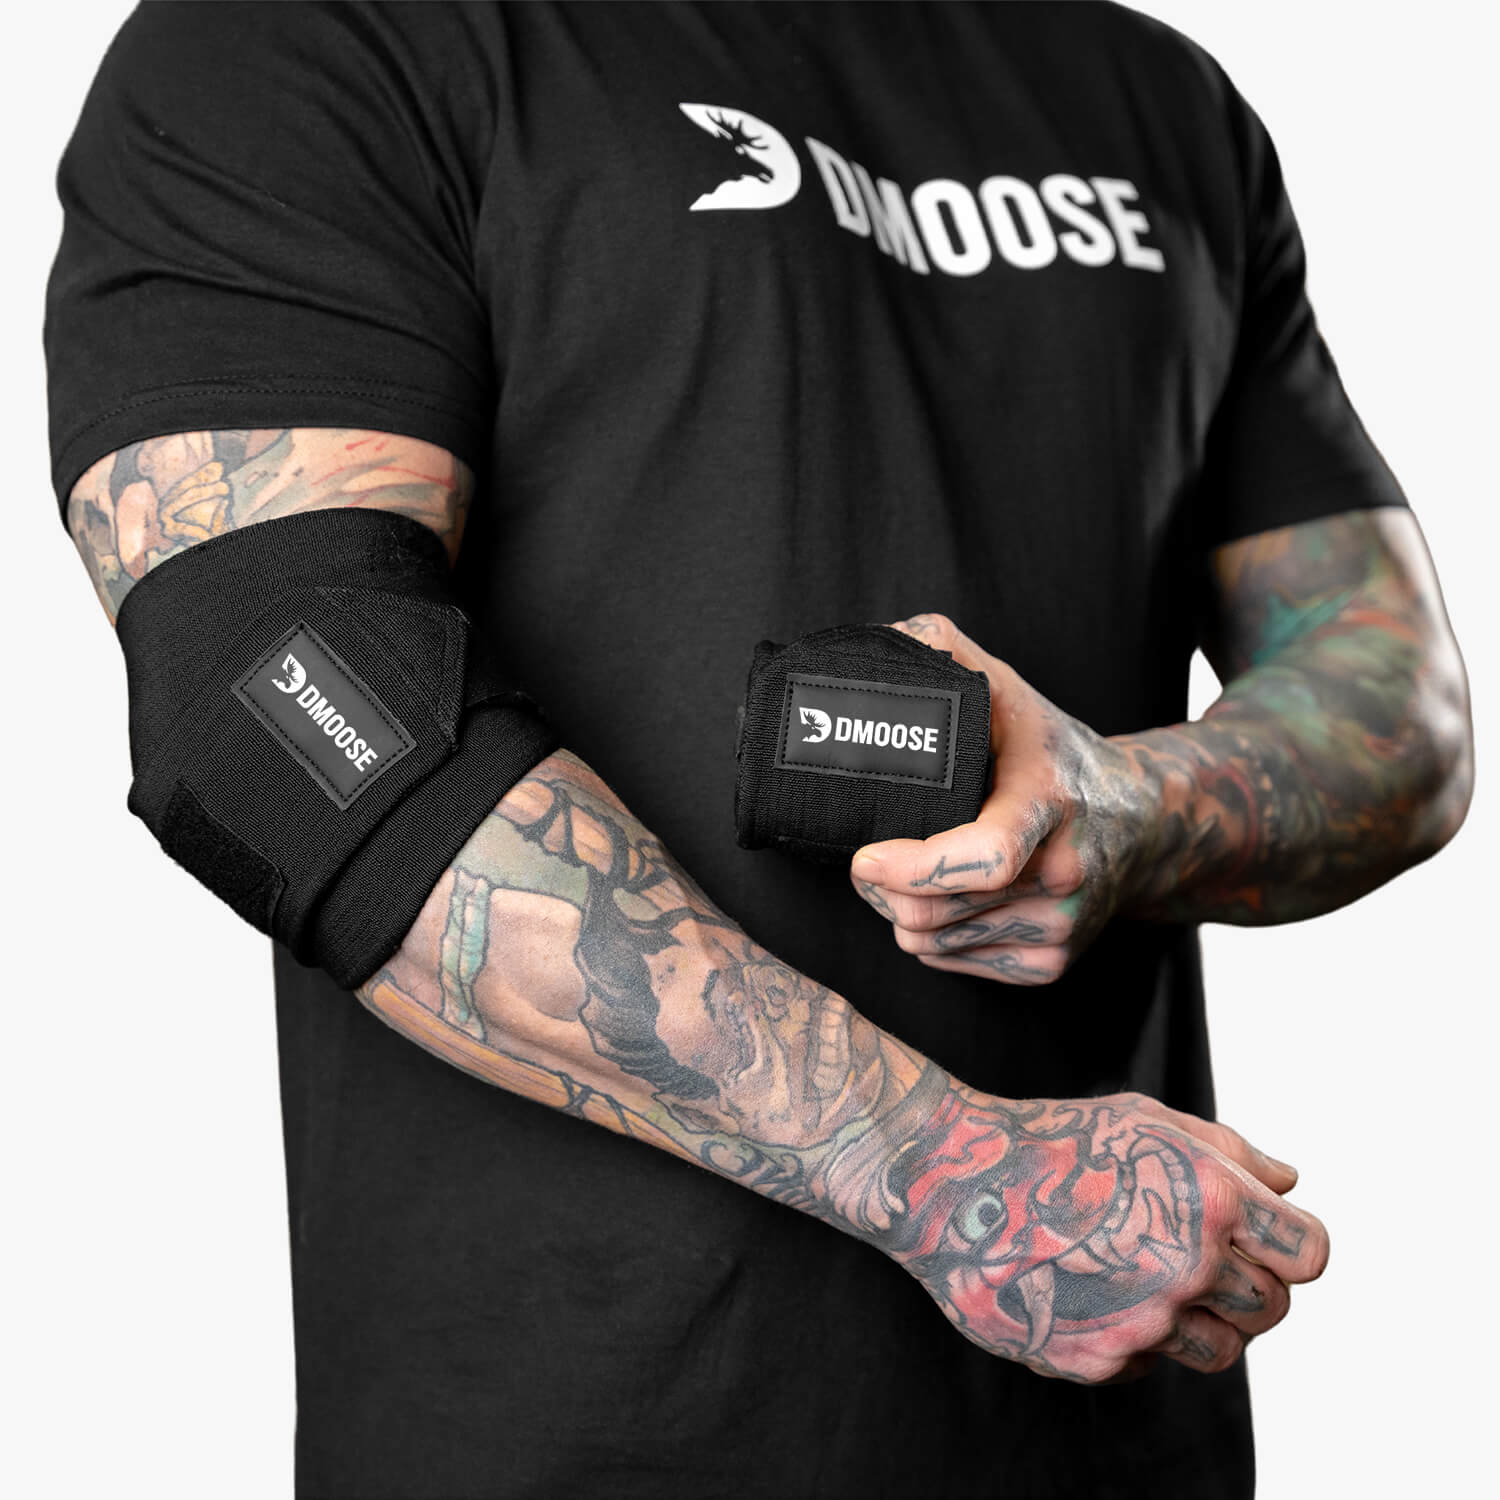 Elbow Wraps for Lifting & Weight Training